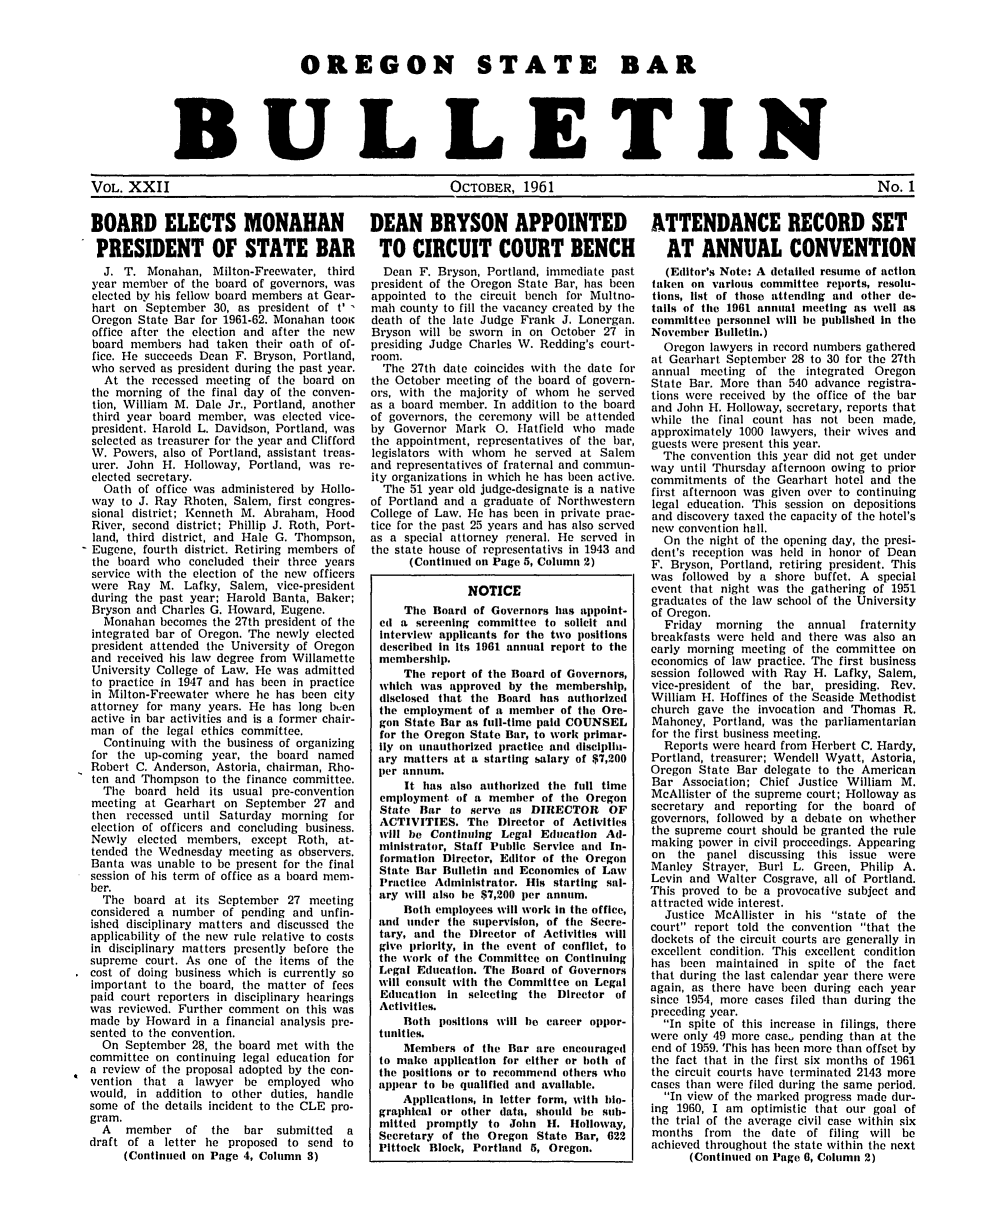 handle is hein.barjournals/osbb0022 and id is 1 raw text is: OREGON STATE BAR
BULLETIN
VOL. XXII                     OCTOBER, 1961                       No. 1
BOARD ELECTS MONAHAN   DEAN BRYSON APPOINTED   ATTENDANCE RECORD SET
PRESIDENT OF STATE BAR  TO CIRCUIT COURT BENCH  AT ANNUAL CONVENTION

J. T. Monahan, Milton-Freewater, third
year member of the board of governors, was
elected by his fellow board members at Gear-
hart on September 30, as president of t'
Oregon State Bar for 1961-62. Monahan tooK
office after the election and after tie new
board members had taken their oath of of-
fice. He succeeds Dean F. Bryson, Portland,
who served as president during the past year.
At the recessed meeting of the board on
the morning of the final day of tile conven-
tion, William M. Dale Jr., Portland, another
third year board member, was elected vice-
president. Harold L. Davidson, Portland, was
selected as treasurer for the year and Clifford
W. Powers, also of Portland, assistant treas-
urer. John H. Holloway, Portland, was re-
elected secretary.
Oath of office was administered by Hollo-
way to J. Ray Rhoten, Salem, first congres-
sional district; Kenneth M. Abraham, Hood
River, second district; Phillip J. Roth, Port-
land, third district, and Hale G. Thompson,
Eugene, fourth district. Retiring members of
the board who concluded their three years
service with the election of the new officers
were Ray M. Lafky, Salem, vice-president
during the past year; Harold Banta, Baker;
Bryson and Charles G. Howard, Eugene.
Monahan becomes the 27th president of the
integrated bar of Oregon. The newly elected
president attended the University of Oregon
and received his law degree from Willamette
University College of Law. He was admitted
to practice in 1947 and has been in practice
in Milton-Freewater where he has been city
attorney for many years. He has long boen
active in bar activities and is a former chair-
man of the legal ethics committee.
Continuing with the business of organizing
for the up-coming year, the board named
Robert C. Anderson, Astoria, chairman, Rho-
ten and Thompson to the finance committee.
The board held its usual pre-convention
meeting at Gearhart on September 27 and
then recessed until Saturday morning for
election of officers and concluding business.
Newly elected members, except Roth, at-
tended the Wednesday meeting as observers.
Banta was unable to be present for the final
session of his term of office as a board mem-
ber.
The board at its September 27 meeting
considered a number of pending and unfin-
ished disciplinary matters and discussed the
applicability of the new rule relative to costs
in disciplinary matters presently before the
supreme court. As one of the items of the
cost of doing business which is currently so
important to the board, the matter of fees
paid court reporters in disciplinary hearings
was reviewed. Further comment on this was
made by Howard in a financial analysis pre-
sented to the convention.
On September 28, the board met with the
committee on continuing legal education for
a review of the proposal adopted by the con-
vention that a lawyer be employed who
would, in addition to other duties, handle
some of the details incident to the CLE pro-
gram.
A   member   of the   bar submitted   a
draft of a letter he proposed to send to
(Continued on Page 4, Column 3)

Dean F. Bryson, Portland, immediate past
president of the Oregon State Bar, has been
appointed to the circuit bench for Multno-
mail county to fill the vacancy created by the
death of the late Judge Frank J. Lonergan.
Bryson will be sworn in on October 27 in
presiding Judge Charles W. Redding's court-
room.
The 27th date coincides with the date for
the October meeting of tie board of govern-
ors, with the majority of whom he served
as a board member. In addition to the board
of governors, the ceremony will be attended
by Governor Mark 0. Hatfield who made
the appointment, representatives of the bar,
legislators with whom he served at Salem
and representatives of fraternal and commun-
ity organizations in which he has been active.
The 51 year old judge-designate is a native
of Portland and a graduate of Northwestern
College of Law. He has been in private prac-
tice for the past 25 years and has also served
as a special attorney general. He served in
the state house of representativs in 1943 and
(Continued on Page 5, Column 2)
NOTICE
The Board of Governors has appoint-
ed a screening committee to solicit and
Interview applicants for the two positions
described in its 1961 annual report to the
membership.
The report of the Board of Governors,
which was approved by the membership,
disclosed that the Board has authorized
the employment of a member of the Ore-
gon State Bar as full-time paid COUNSEL
for the Oregon State Bar, to work primar-
Ily on unauthorized practice and disciplia-
ary matters at a starting salary of $7,200
per annum.
It has also authorized the full time
employment of a member of the Oregon
State Bar to serve as DIRECTOR OF
ACTIVITIES. The Director of Activities
will be Continuing Legal Education Ad-
ministrator, Staff Public Service and In-
formation Director, Editor of the Oregon
State Bar Bulletin and Economics of Law
Practice Administrator. His starting sal-
ary will also he $7,200 per annum.
Both employees will work in the office,
and unler the supervision, of the Secre-
tary, anti the Director of Activities will
give priority, in the event of conflict, to
the work of the Committee on Continuing
Legal Education. The Board of Governors
will consult with the Committee on Legal
Education In selecting the Director of
Activities.
Both positions will he career oppor-
tunitles.
Members of the Bar are encouraged
to make application for either or both of
the positions or to recommend others who
appear to he qualified and available.
Applications, in letter form, with bio-
graphical or other data, should b)e sub-
mitted promptly to John 11. Holloway,
Secretary of the Oregon State Bar, 622
Pittock Block, Portland 5, Oregon.

(Editor's Note: A detailed resume of action
taken on various committee reports, resolu-
tions, list of those attending and other de-
tails of the 1961 annual meeting as well as
committee personnel will be published in the
November Bulletin.)
Oregon lawyers in record numbers gathered
at Gearhart September 28 to 30 for the 27th
annual meeting of the integrated Oregon
State Bar. More than 540 advance registra-
tions were received by the office of the bar
and John H. Holloway, secretary, reports that
while the final count has not been made,
approximately 1000 lawyers, their wives and
guests were present this year.
The convention this year did not get under
way until Thursday afternoon owing to prior
commitments of the Gearhart hotel and the
first afternoon was given over to continuing
legal education. This session on depositions
and discovery taxed the capacity of the hotel's
nev convention hall.
On the night of the opening day, the presi-
dent's reception was held in honor of Dean
F. Bryson, Portland, retiring president. This
was followed by a shore buffet. A special
event that night was the gathering of 1951
graduates of the law school of the University
of Oregon.
Friday  morning  the  annual fraternity
breakfasts were held and there was also an
early morning meeting of the committee on
economics of law practice. The first business
session followed with Ray H. Lafky, Salem,
vice-president of the bar, presiding. Rev.
William H. Hoffines of the Seaside Methodist
church gave the invocation and Thomas R.
Mahoney, Portland, was the parliamentarian
for the first business meeting.
Reports were heard from Herbert C. Hardy,
Portland, treasurer; Wendell Wyatt, Astoria,
Oregon State Bar delegate to the American
Bar Association; Chief Justice William M.
McAllister of the supreme court; Holloway as
secretary and reporting for the board of
governors, followed by a debate on whether
the supreme court should be granted the rule
making power in civil proceedings. Appearing
on the panel discussing this issue were
Manley Strayer, Burl L. Green, Philip A.
Levin and Walter Cosgrave, all of Portland.
This proved to be a provocative subject and
attracted wide interest.
Justice McAllister in his state of the
court report told the convention that the
dockets of the circuit courts are generally in
excellent condition. This excellent condition
has been maintained in spite of the fact
that during the last calendar year there were
again, as there have been during each year
since 1954, more cases filed than during the
preceding year.
In spite of this increase in filings, there
were only 49 more case, pending than at the
end of 1959. This has been more than offset by
the fact that in tile first six months of 1961
the circuit courts have terminated 2143 more
cases than were filed during the same period.
In view of the marked progress made dur-
ing 1960, I am optimistic that our goal of
the trial of the average civil case within six
months from the date of filing will be
achieved throughout the state within tile next
(Continued on Page 6, Column 2)


